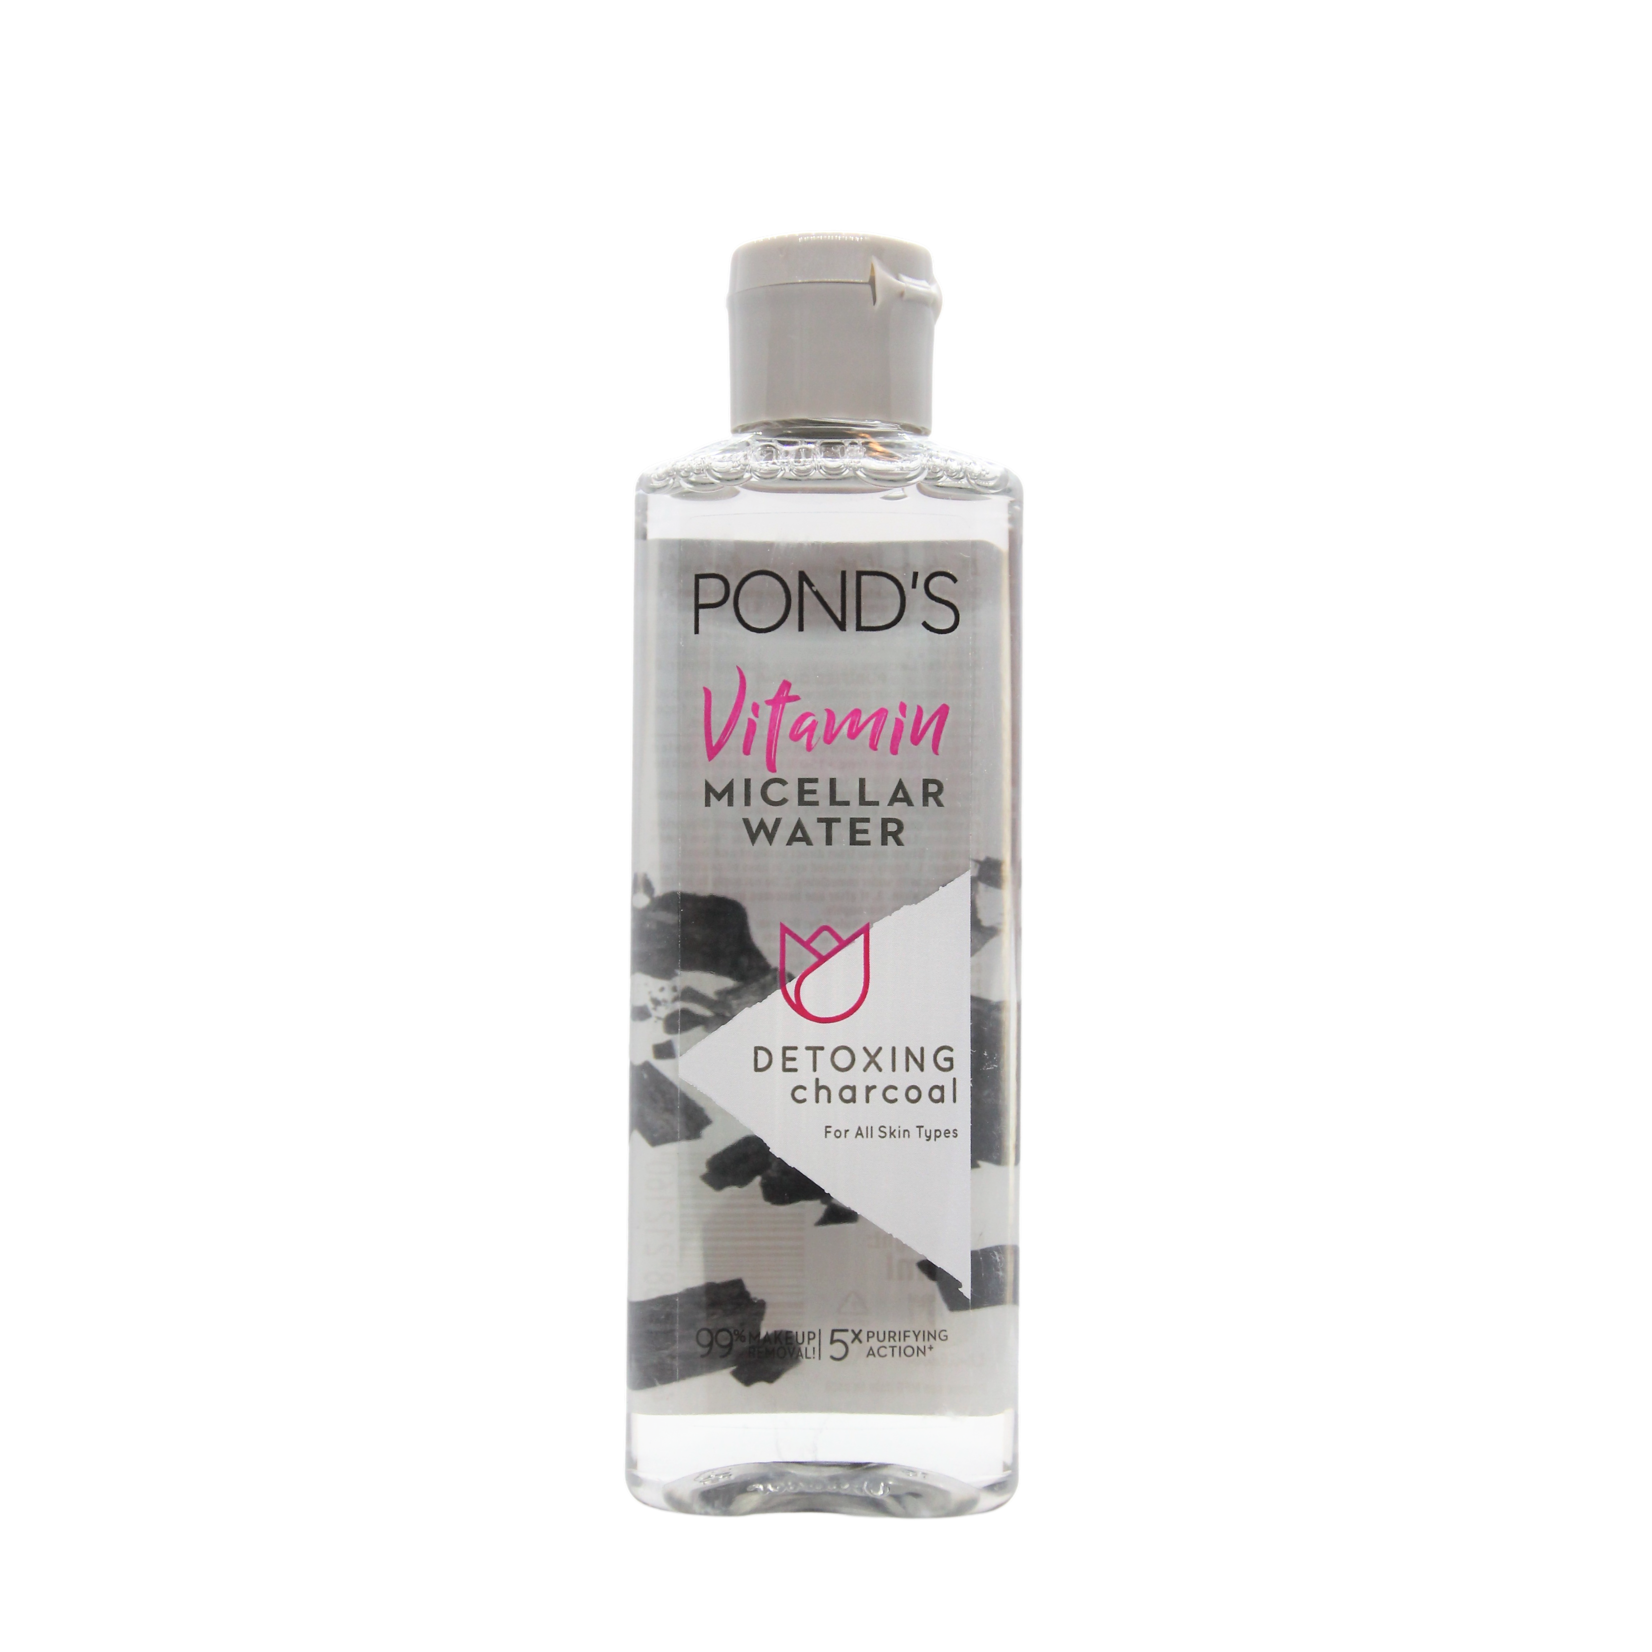 Pond's Pond's Vitamin Micellair Water Detoxing charcoal, 100 ml